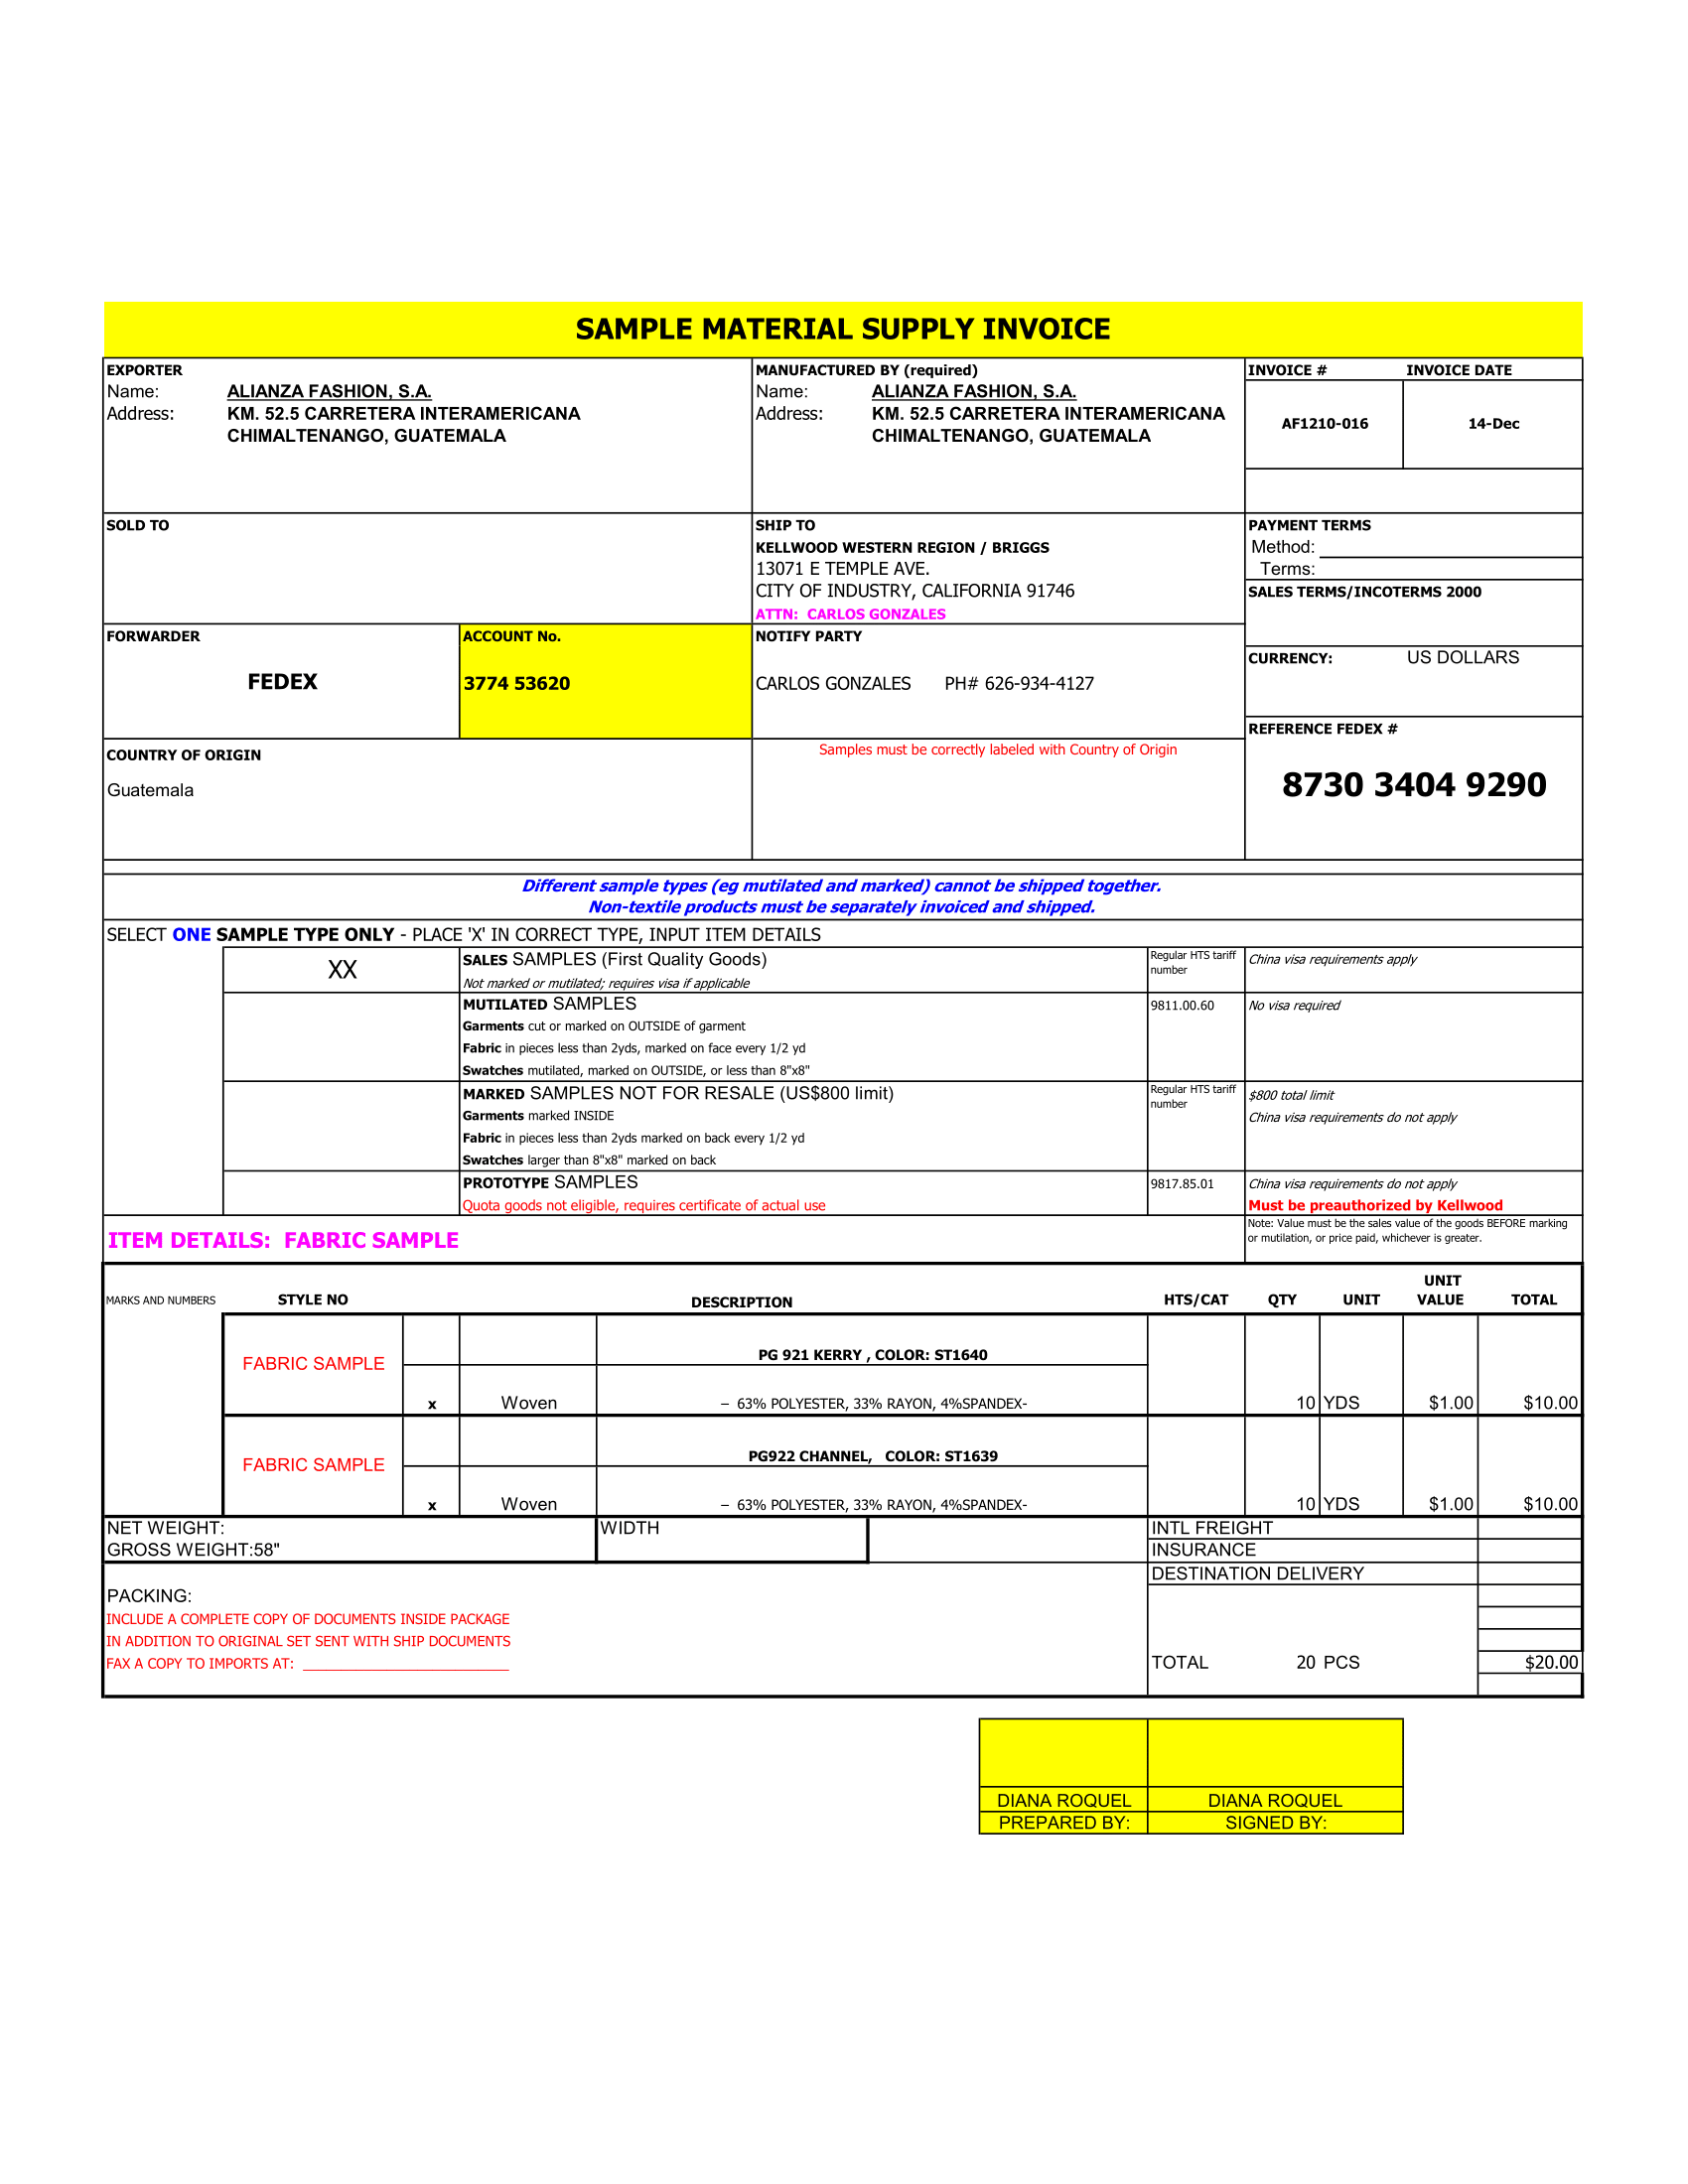 Sample Material Supply Invoice